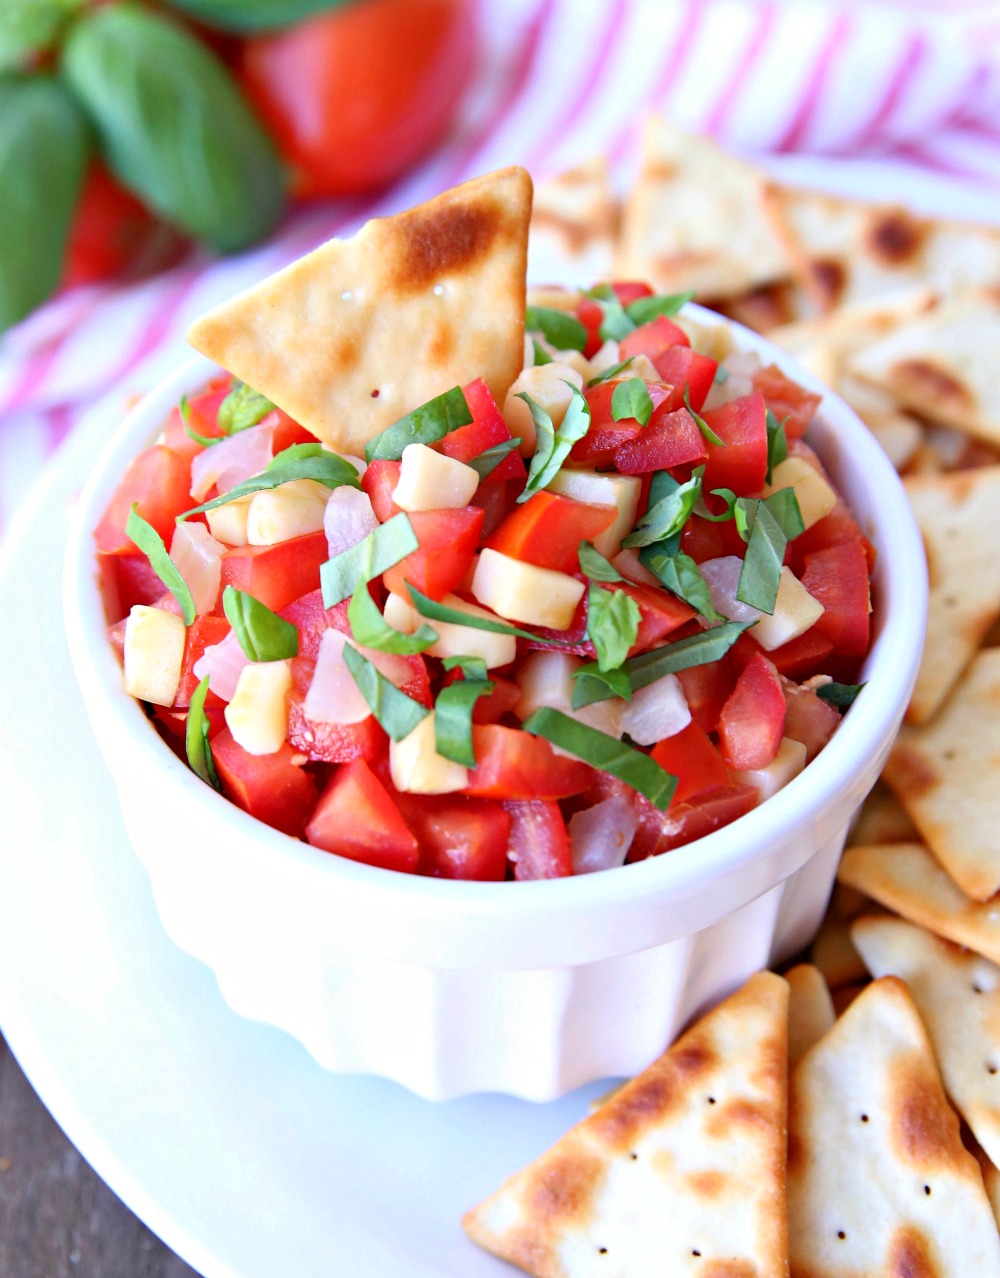  Turn your favorite caprese salad into a delicious appetizer with this Caprese Salsa recipe. It's easy to make and perfect for every holiday, family gathering, tailgating, and more!